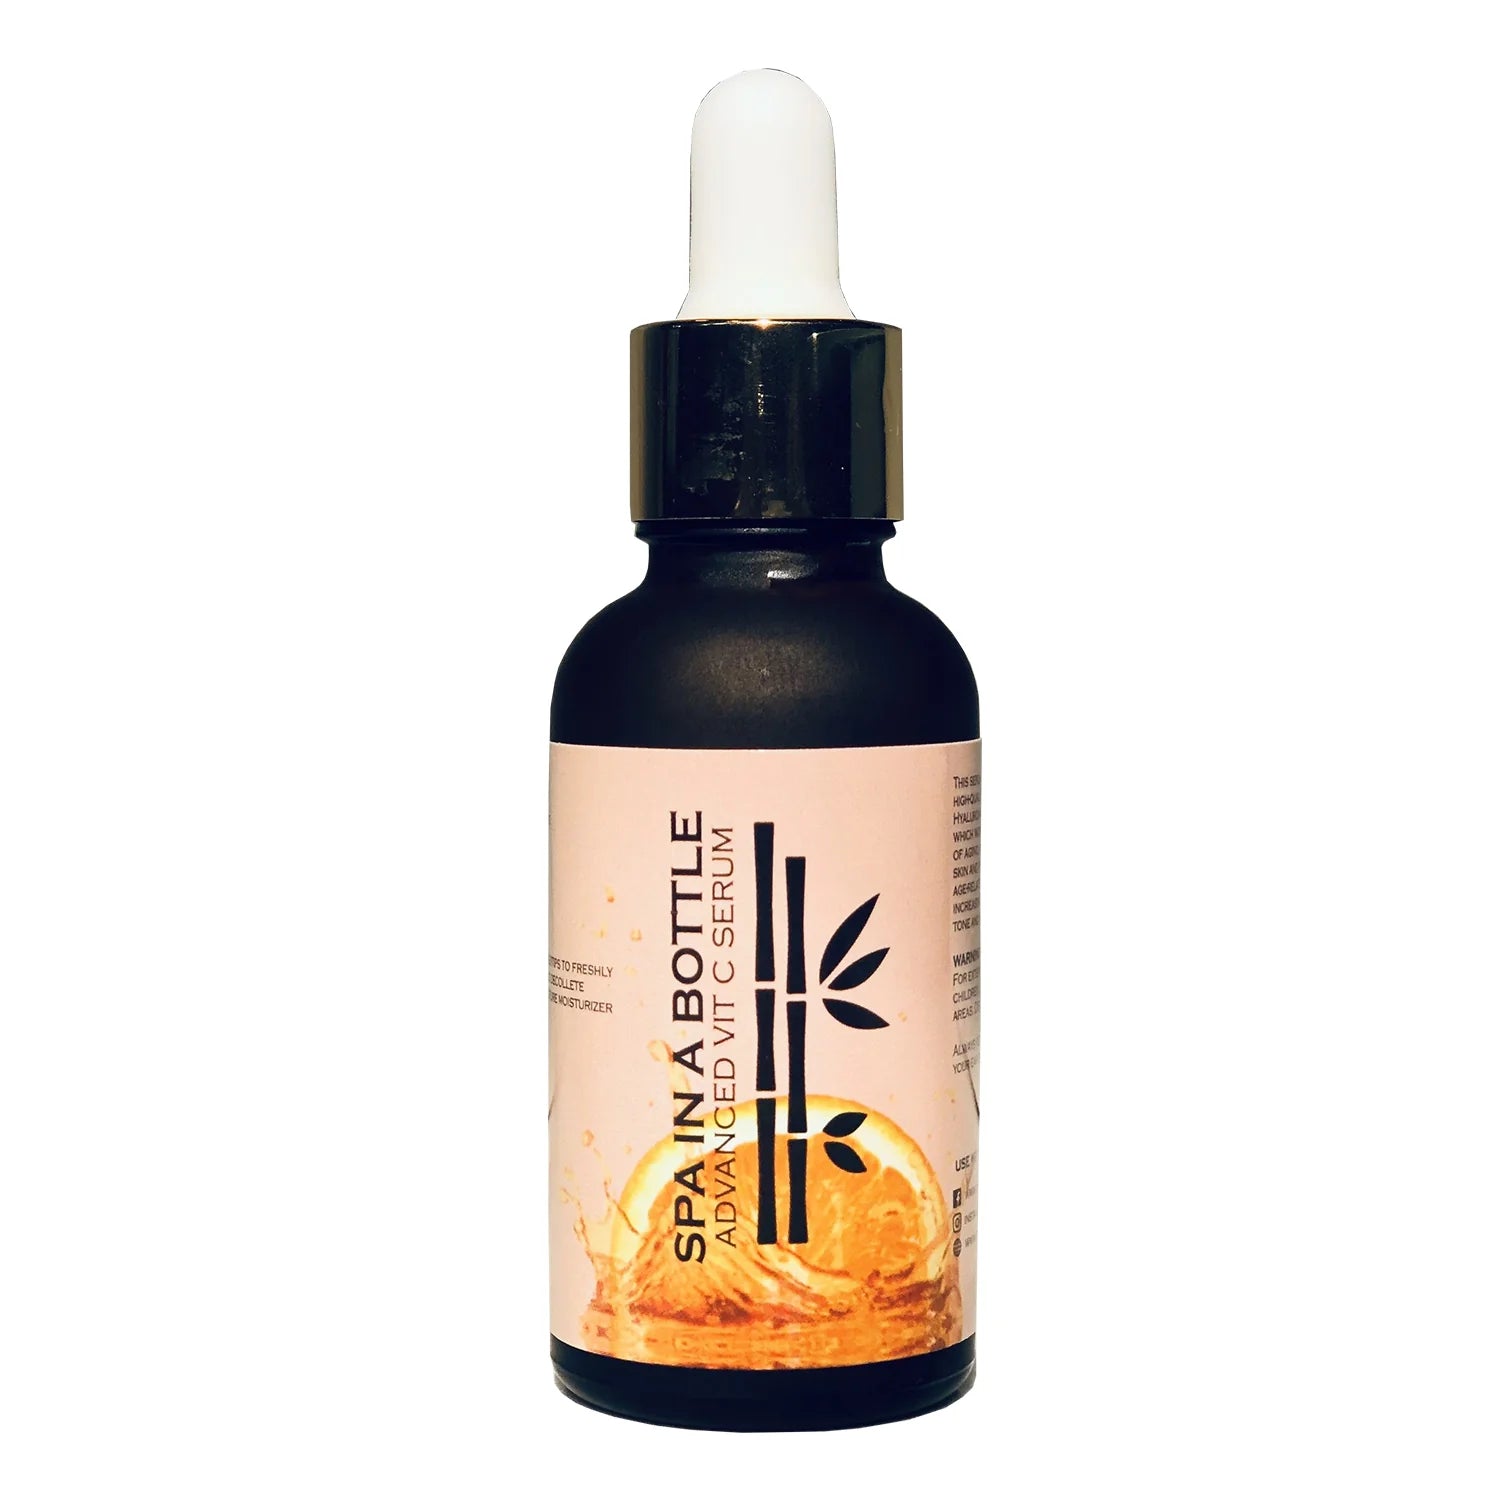  SPA in a Bottle Advanced Vitamin C Serum (30 mL): Illuminate, defy, and rejuvenate with this scientifically advanced age-defying elixir for radiant and youthful skin.